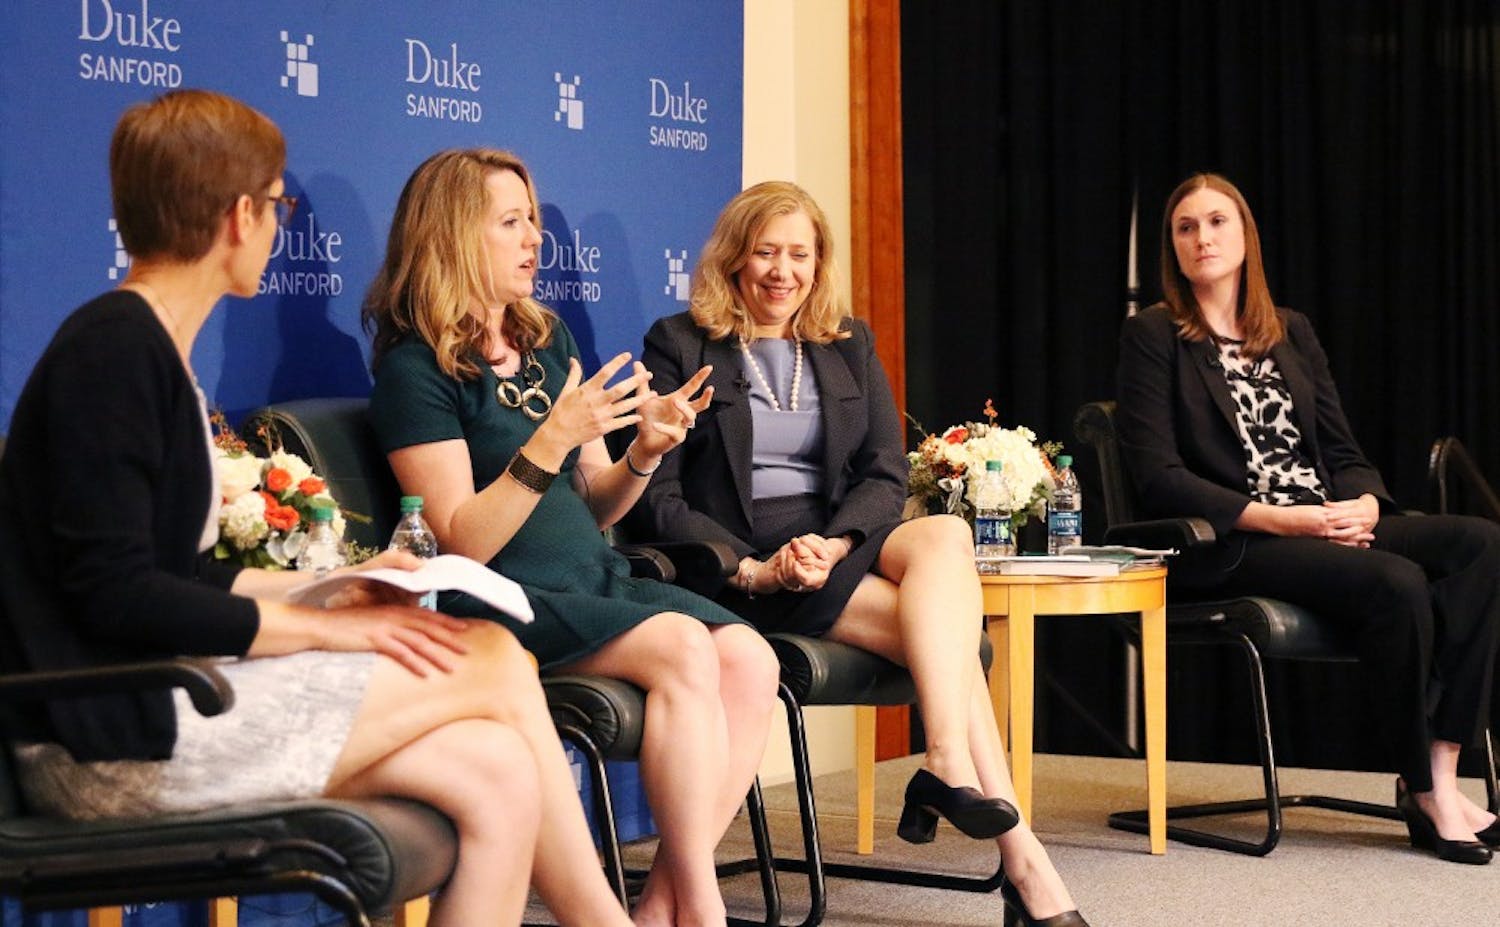 Professor Judith Kelley moderated a discussion among three high-ranking Duke women about human trafficking.